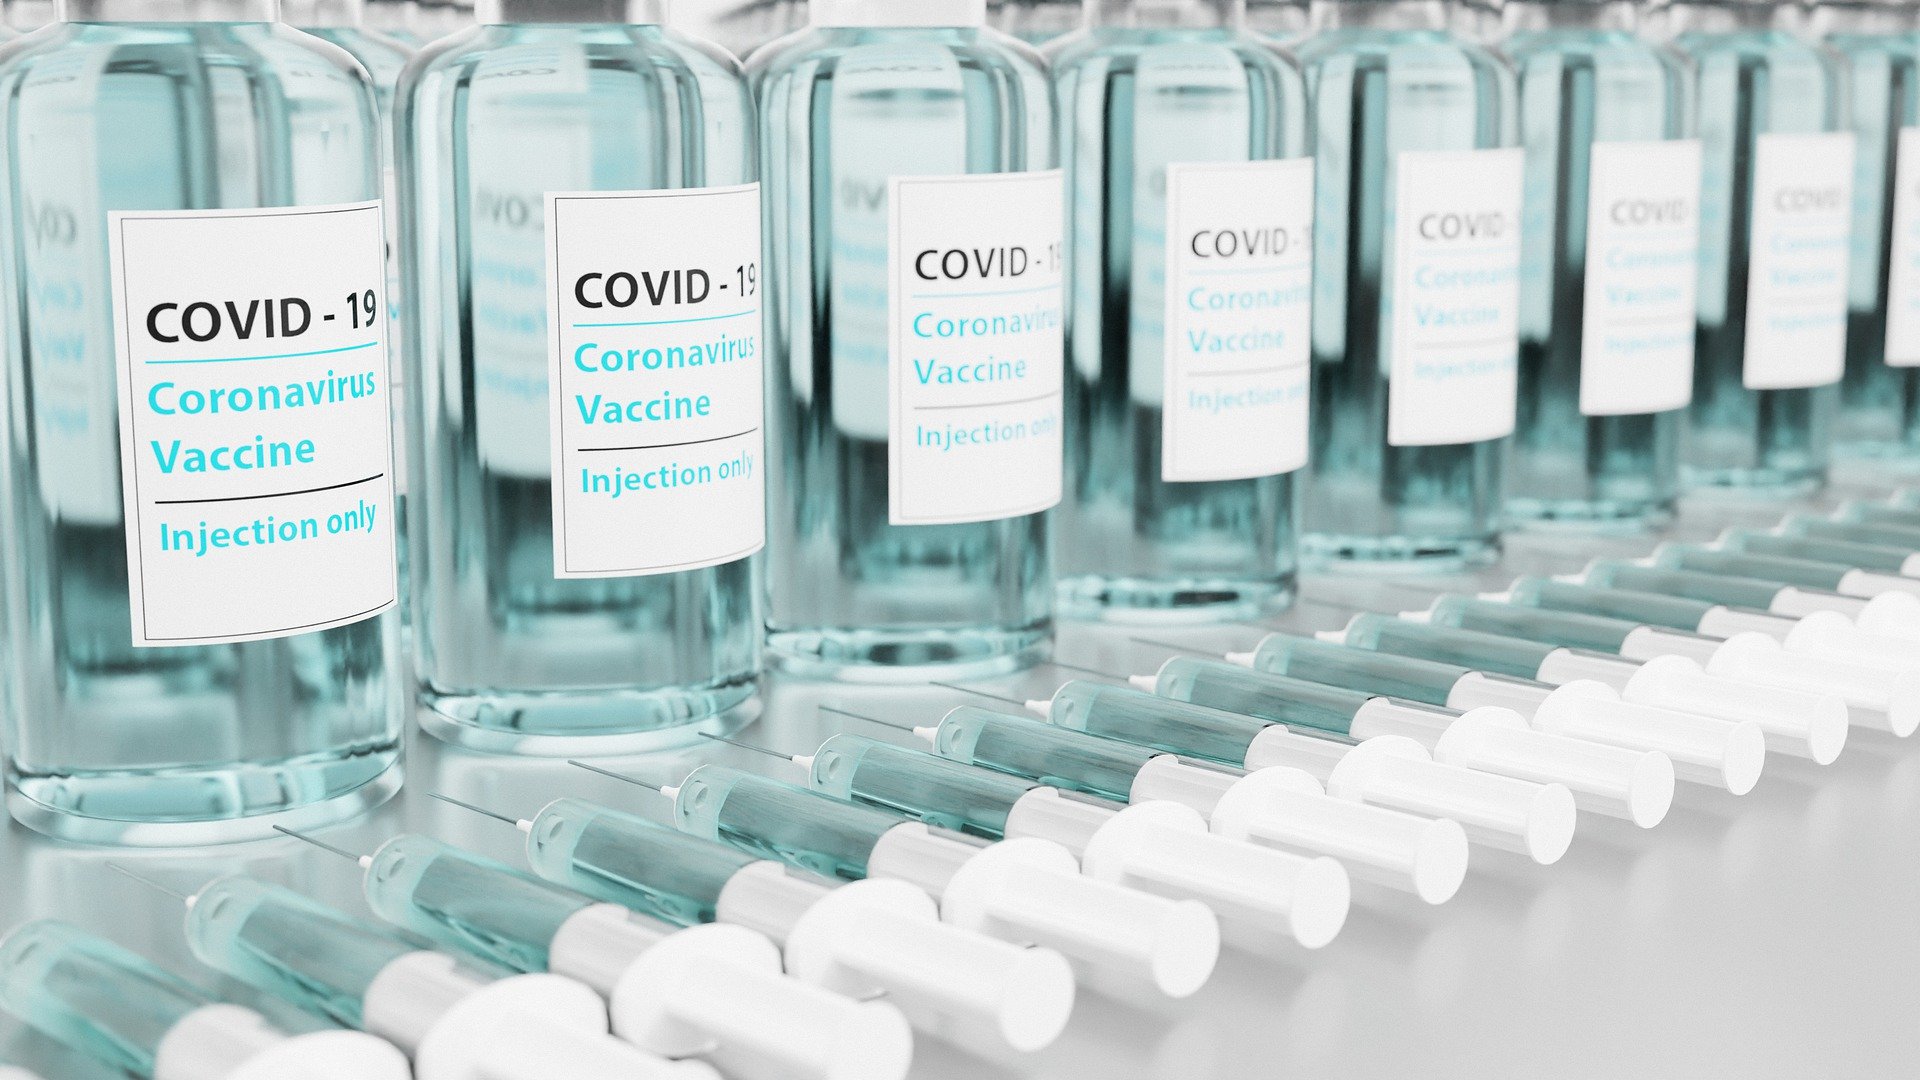 An image of COVID-19 vaccines and syringes.